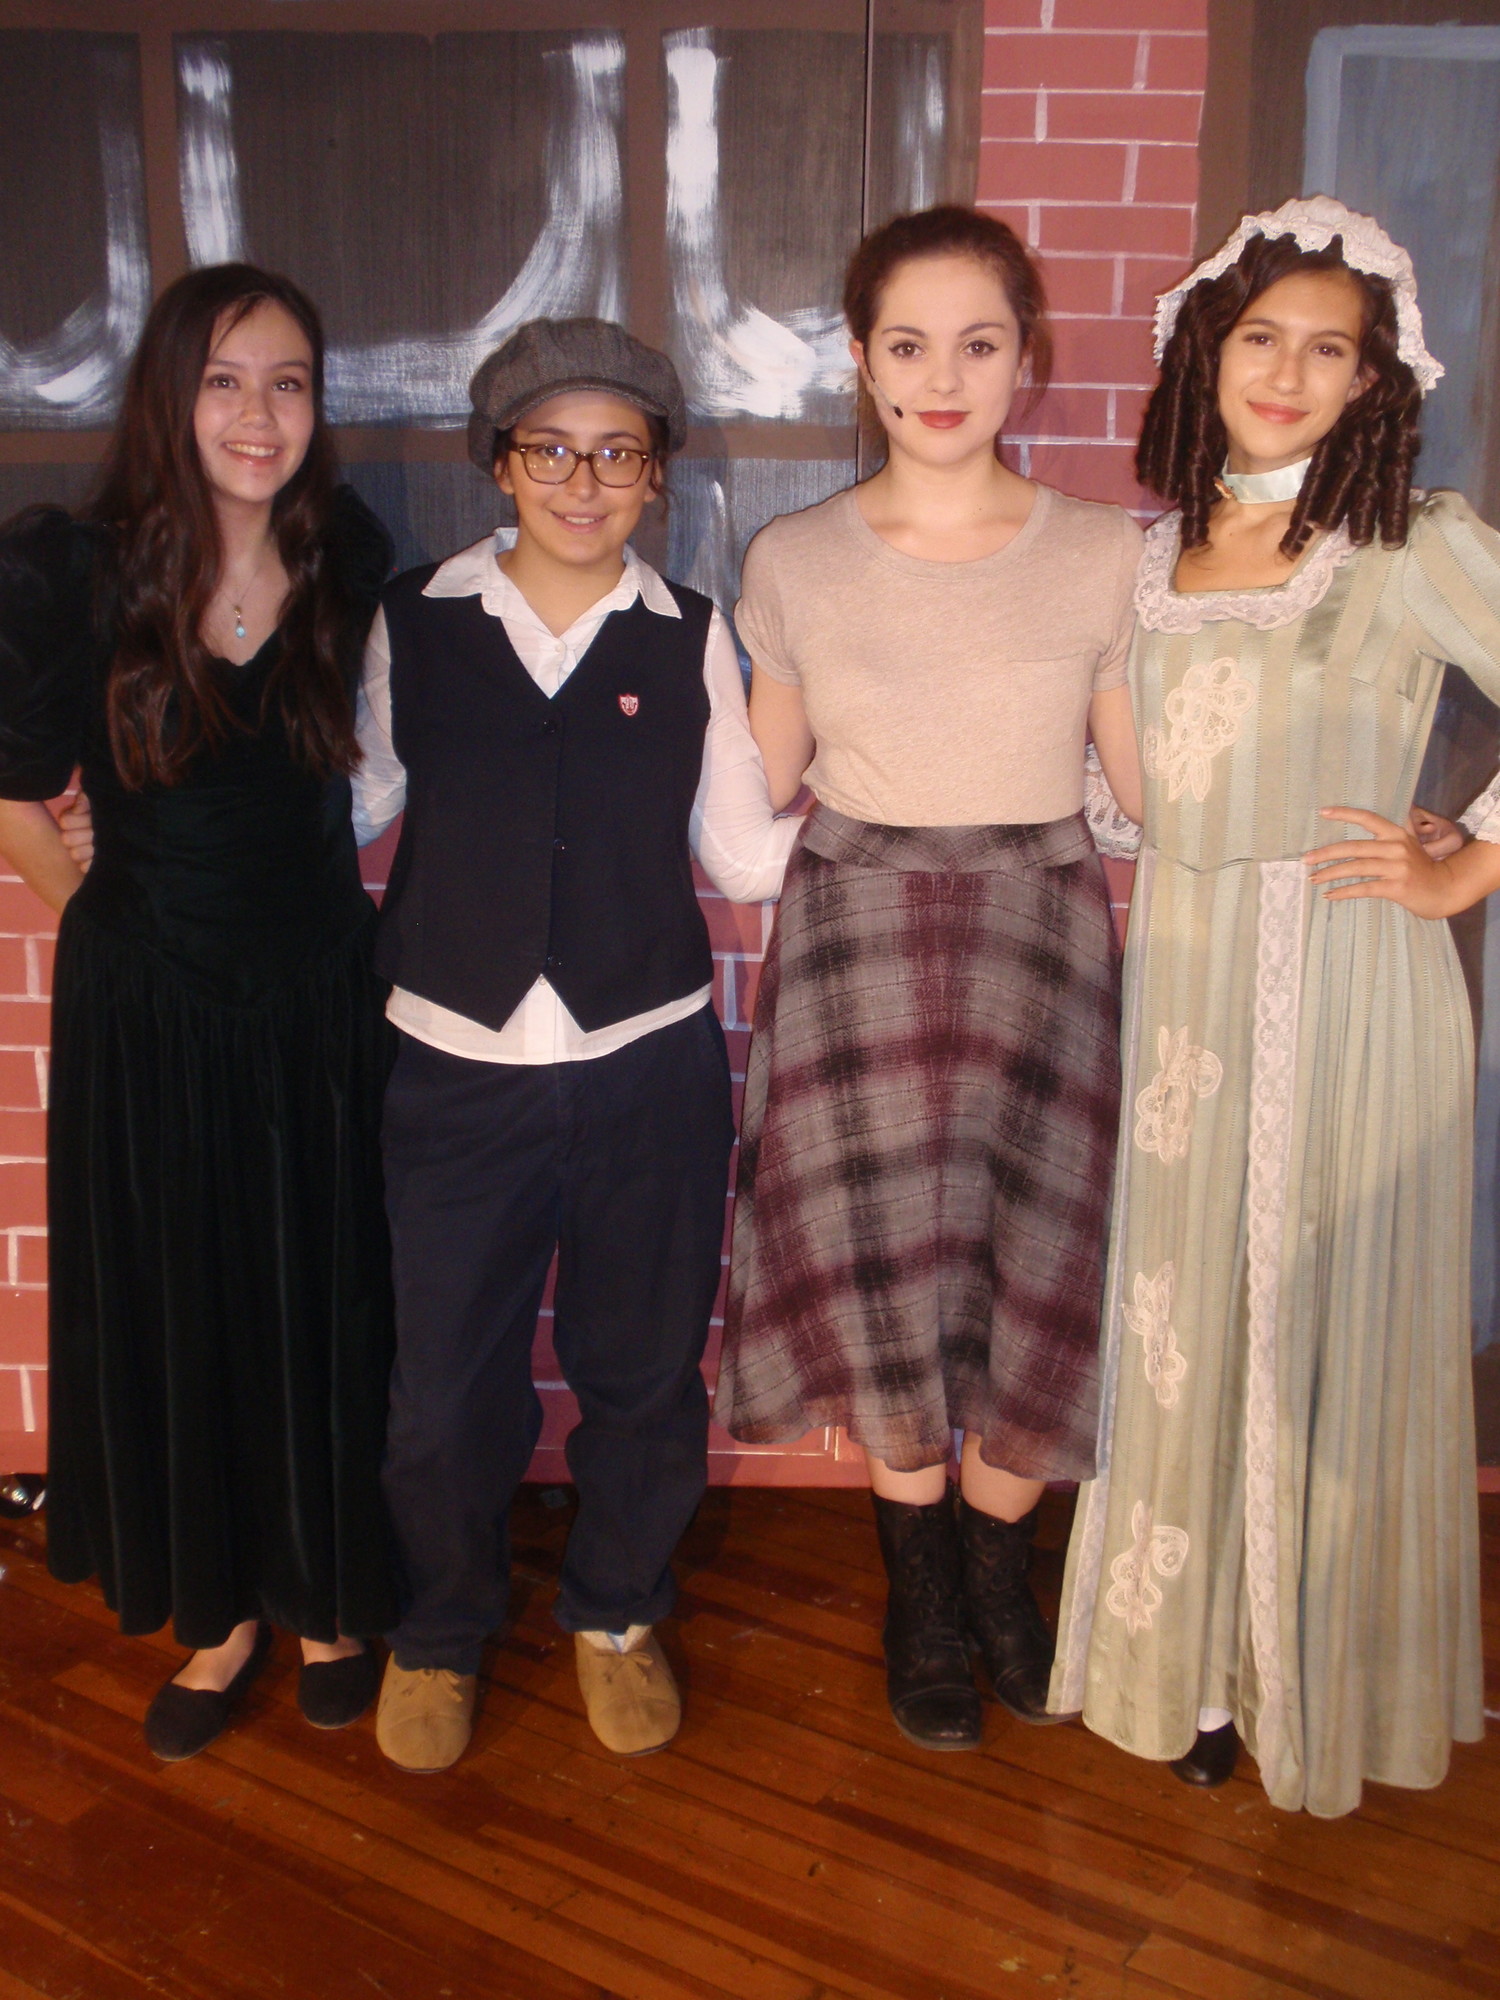 Iris Wiener/Herald
Performing in “A Christmas Carol” at North High School were, from left, Isabel Chen, Victoria Calabrese, Isabella Parisi and Angelina Perrone.